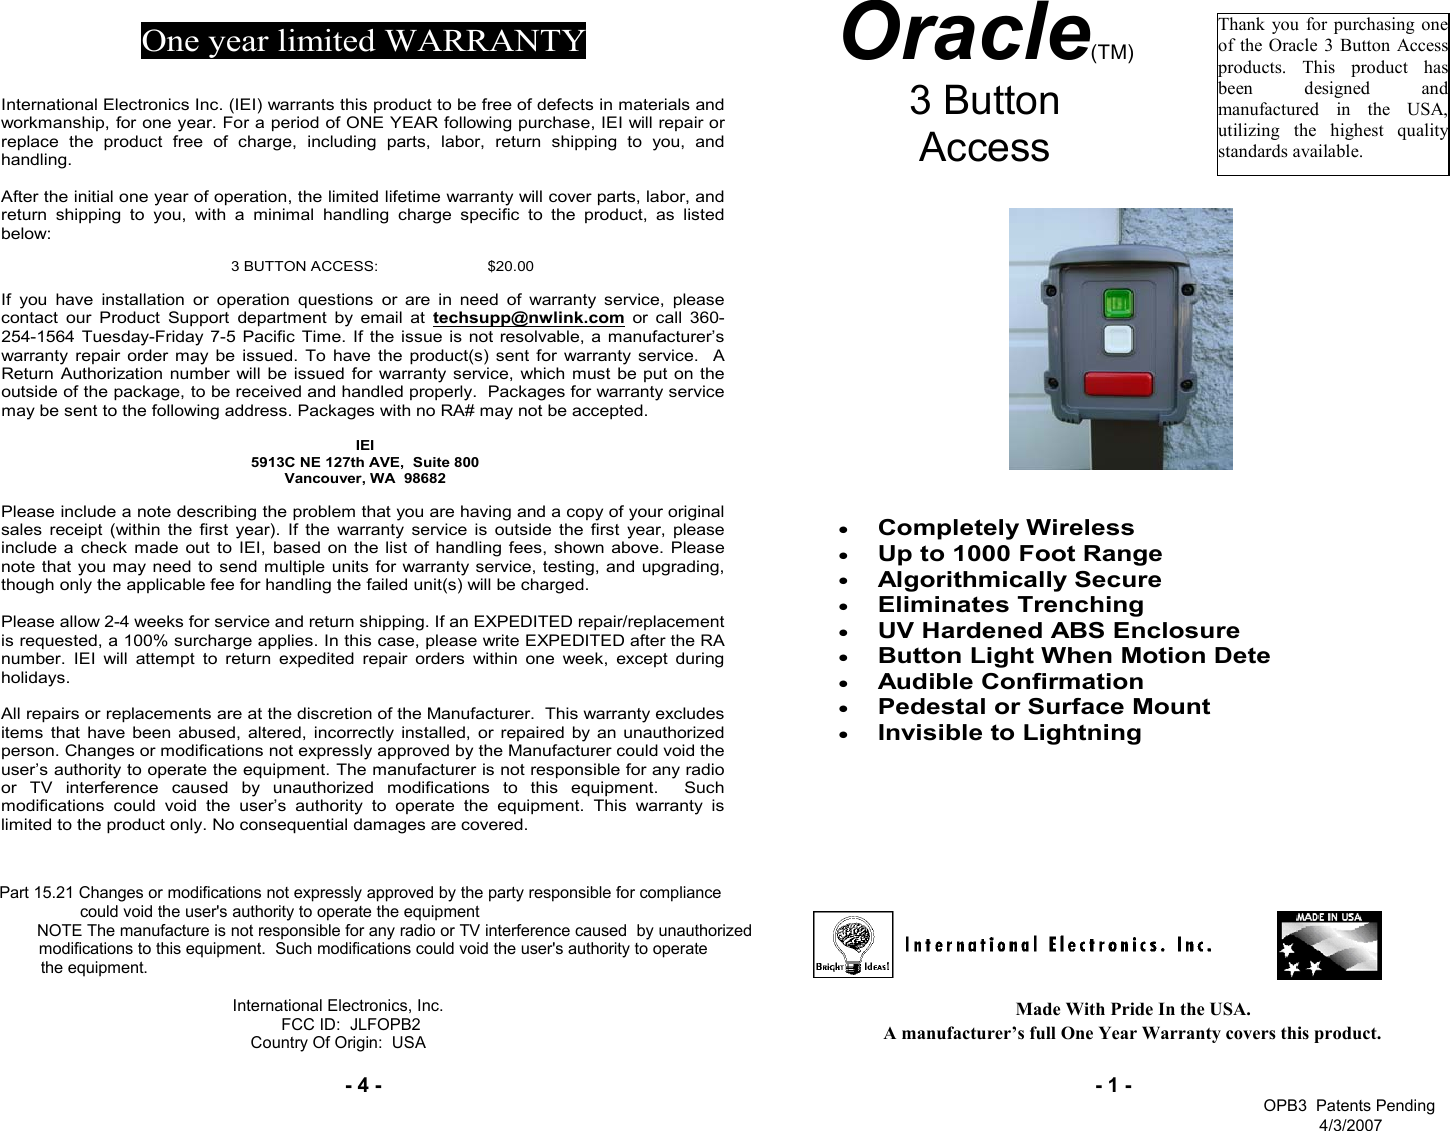 - 4 -Made With Pride In the USA.                                             A manufacturer’s full One Year Warranty covers this product.- 1 -Oracle(TM) 3 Button  Access   Thank you for purchasing one of the Oracle 3 Button Access products. This product has been designed and manufactured in the USA, utilizing the highest quality standards available. One year limited WARRANTY   International Electronics Inc. (IEI) warrants this product to be free of defects in materials and workmanship, for one year. For a period of ONE YEAR following purchase, IEI will repair or replace the product free of charge, including parts, labor, return shipping to you, and handling.   After the initial one year of operation, the limited lifetime warranty will cover parts, labor, and return shipping to you, with a minimal handling charge specific to the product, as listed below:  3 BUTTON ACCESS:   $20.00  If you have installation or operation questions or are in need of warranty service, please contact our Product Support department by email at techsupp@nwlink.com or call 360-254-1564 Tuesday-Friday 7-5 Pacific Time. If the issue is not resolvable, a manufacturer’s warranty repair order may be issued. To have the product(s) sent for warranty service.  A Return Authorization number will be issued for warranty service, which must be put on the outside of the package, to be received and handled properly.  Packages for warranty service may be sent to the following address. Packages with no RA# may not be accepted.  IEI 5913C NE 127th AVE,  Suite 800 Vancouver, WA  98682   Please include a note describing the problem that you are having and a copy of your original sales receipt (within the first year). If the warranty service is outside the first year, please include a check made out to IEI, based on the list of handling fees, shown above. Please note that you may need to send multiple units for warranty service, testing, and upgrading, though only the applicable fee for handling the failed unit(s) will be charged.   Please allow 2-4 weeks for service and return shipping. If an EXPEDITED repair/replacement is requested, a 100% surcharge applies. In this case, please write EXPEDITED after the RA number. IEI will attempt to return expedited repair orders within one week, except during holidays.  All repairs or replacements are at the discretion of the Manufacturer.  This warranty excludes items that have been abused, altered, incorrectly installed, or repaired by an unauthorized person. Changes or modifications not expressly approved by the Manufacturer could void the user’s authority to operate the equipment. The manufacturer is not responsible for any radio or TV interference caused by unauthorized modifications to this equipment.  Such modifications could void the user’s authority to operate the equipment. This warranty is limited to the product only. No consequential damages are covered. Part 15.21 Changes or modifications not expressly approved by the party responsible for compliance              could void the user&apos;s authority to operate the equipmentNOTE The manufacture is not responsible for any radio or TV interference caused  by unauthorized     modifications to this equipment.  Such modifications could void the user&apos;s authority to operate          the equipment. International Electronics, Inc. FCC ID:  JLFOPB2Country Of Origin:  USA • Completely Wireless  • Up to 1000 Foot Range • Algorithmically Secure • Eliminates Trenching  • UV Hardened ABS Enclosure  • Button Light When Motion Detected  • Audible Confirmation  • Pedestal or Surface Mount  • Invisible to Lightning          OPB3  Patents Pending4/3/2007